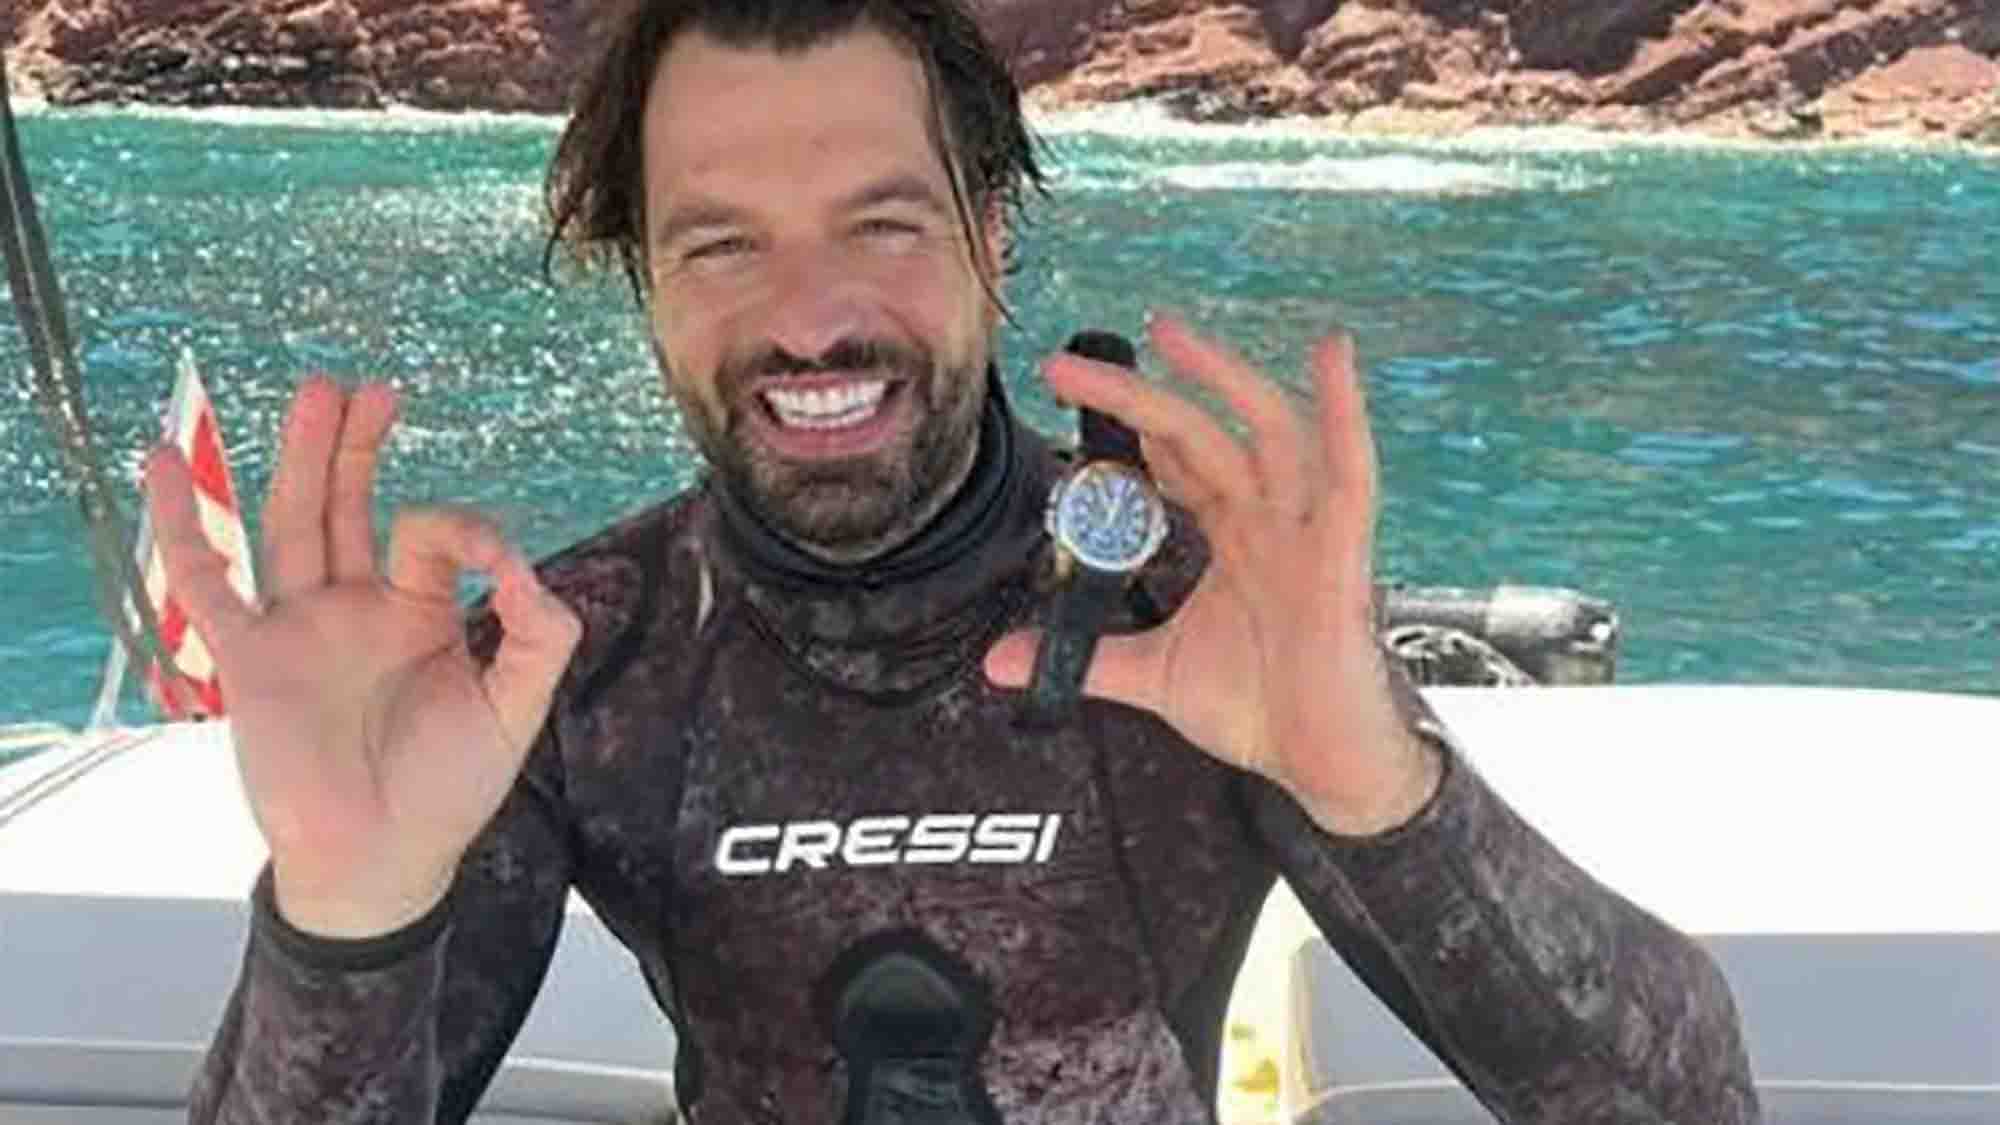 Diver Finds GBP 55,000 Watch At Bottom Of Sea